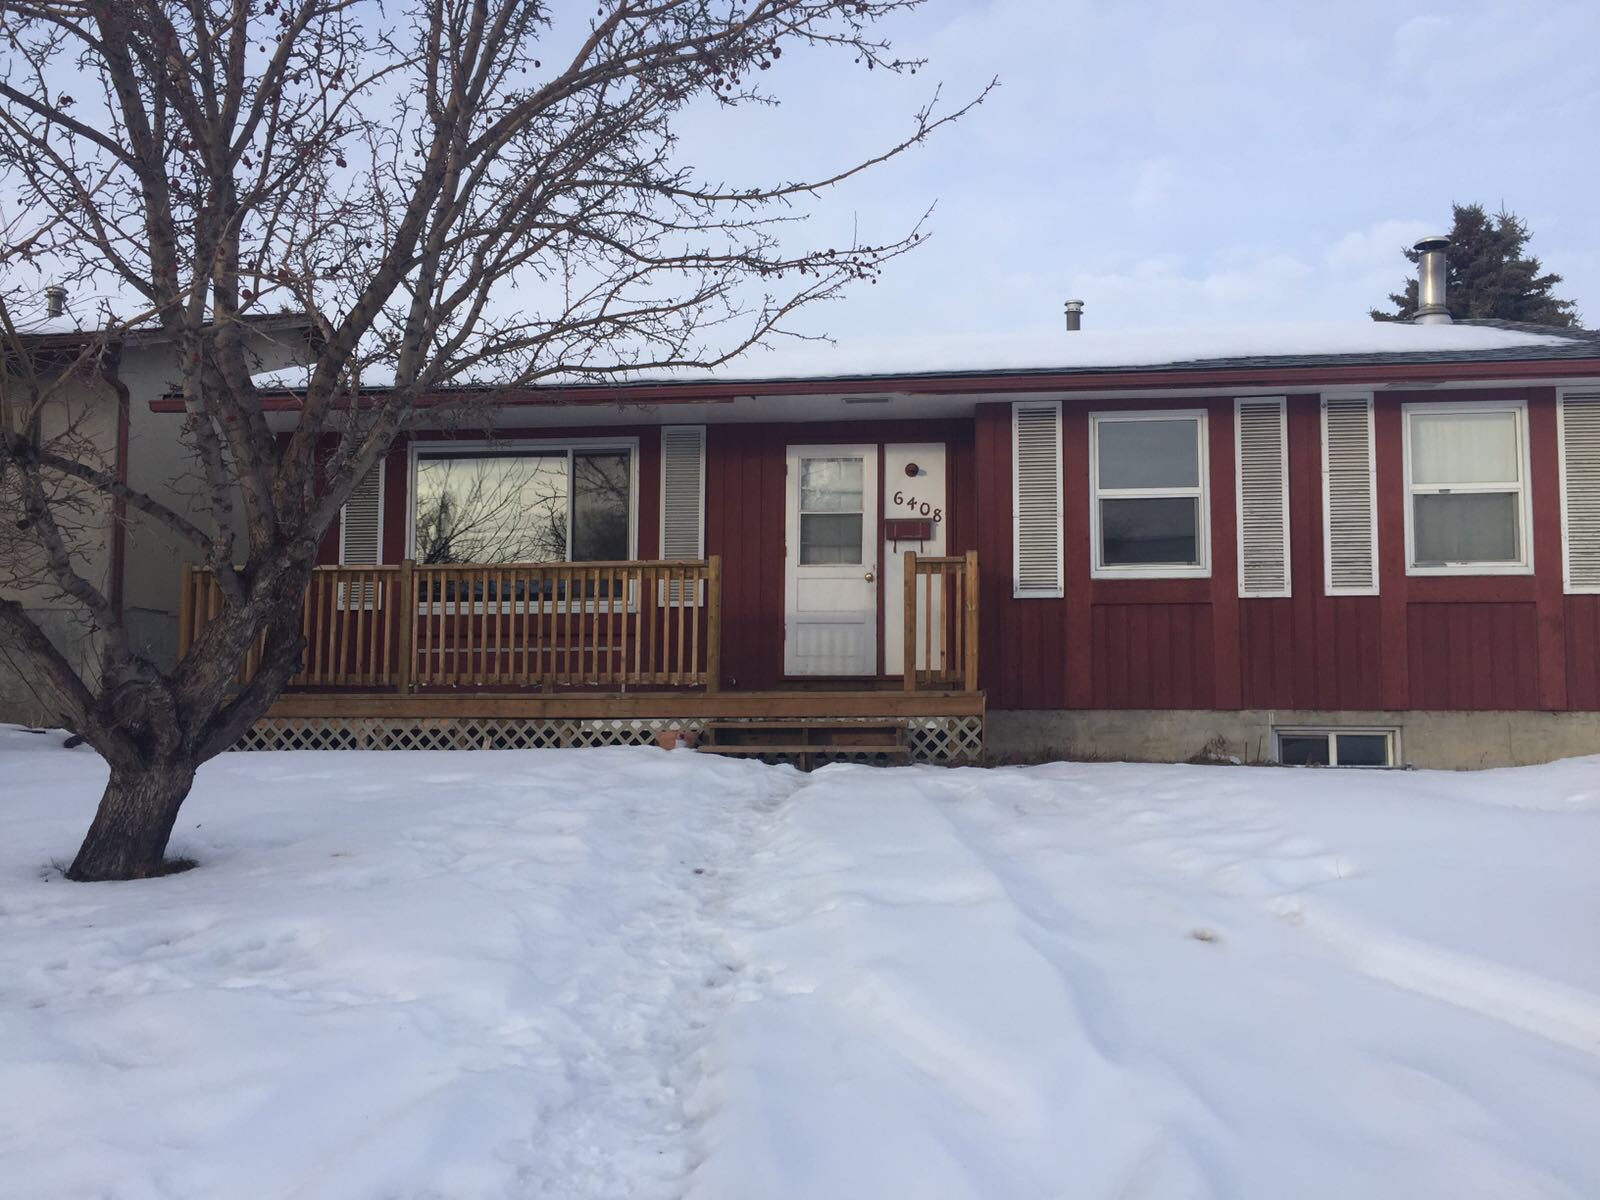 Single Bungalow with 5 bdrms in Pineridge Area ready to go!